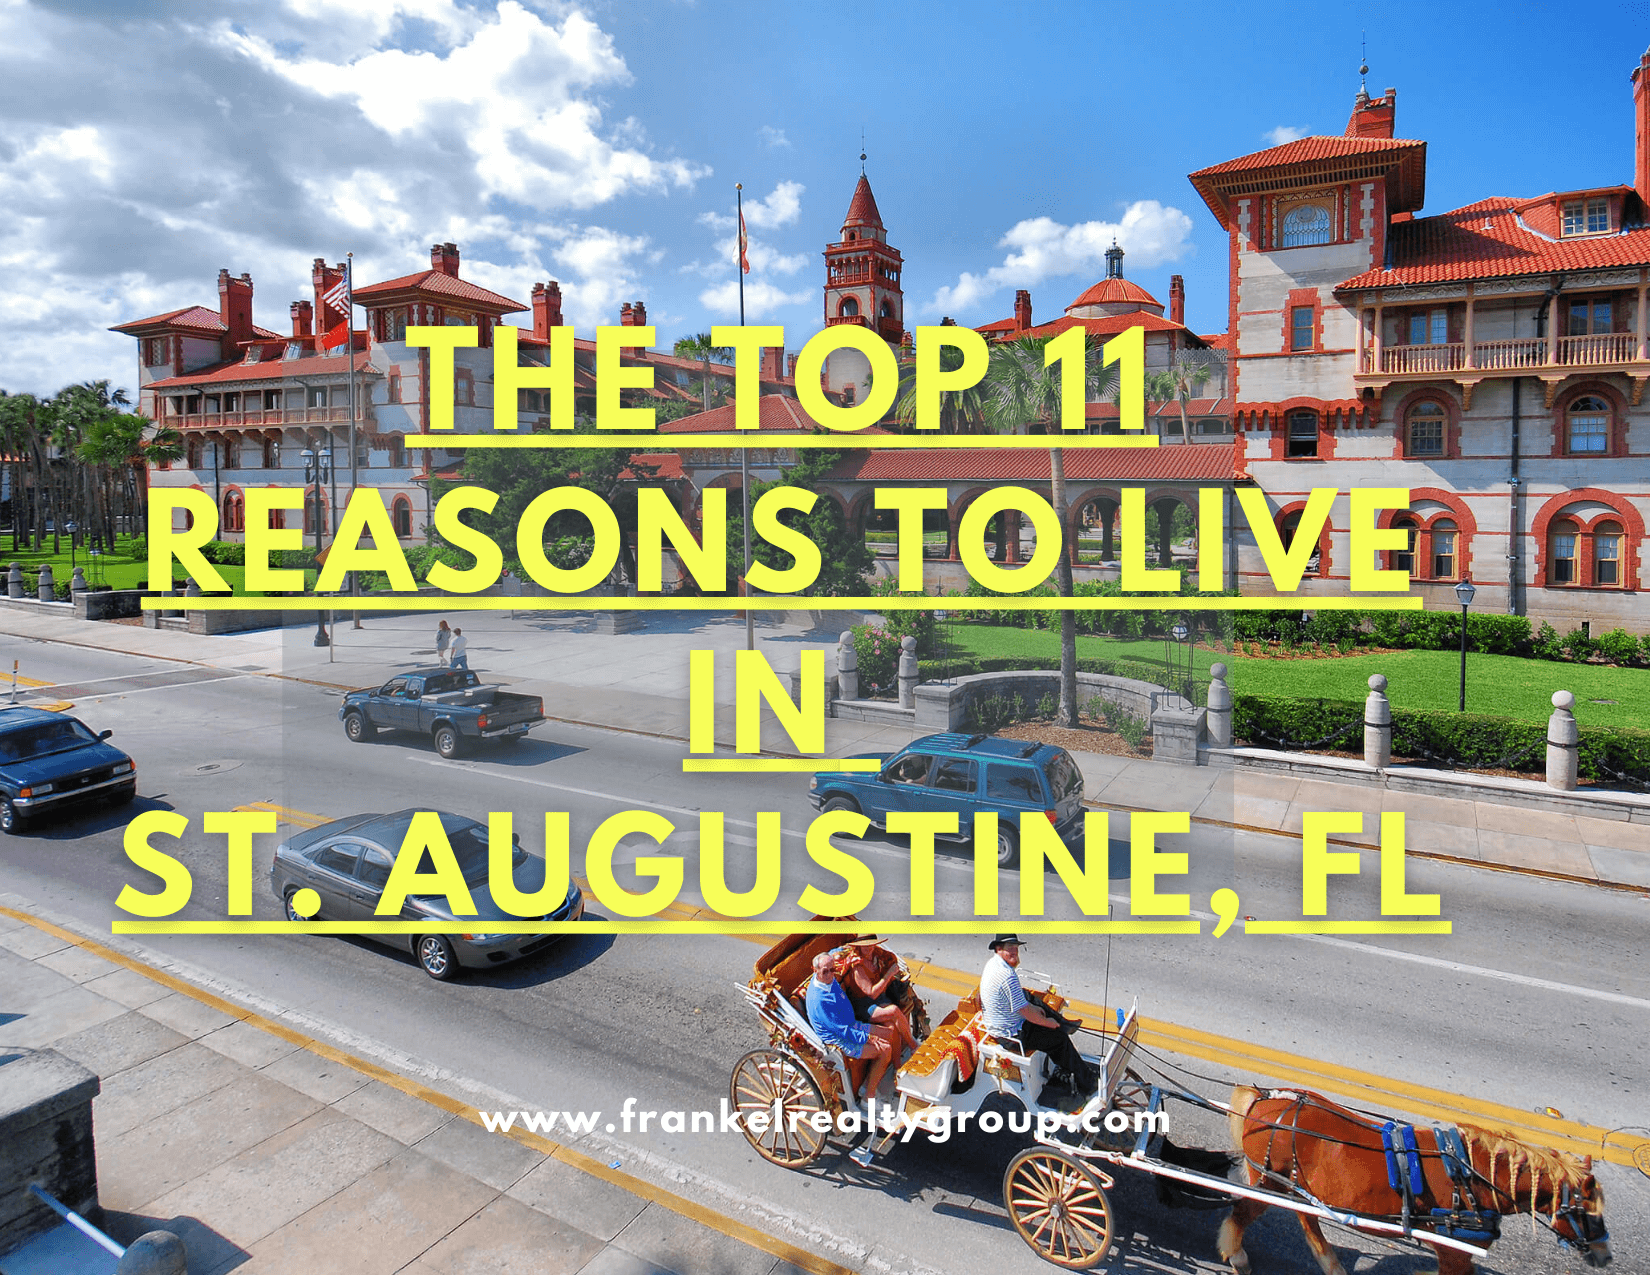 Old St Augustine FL is charming and historic